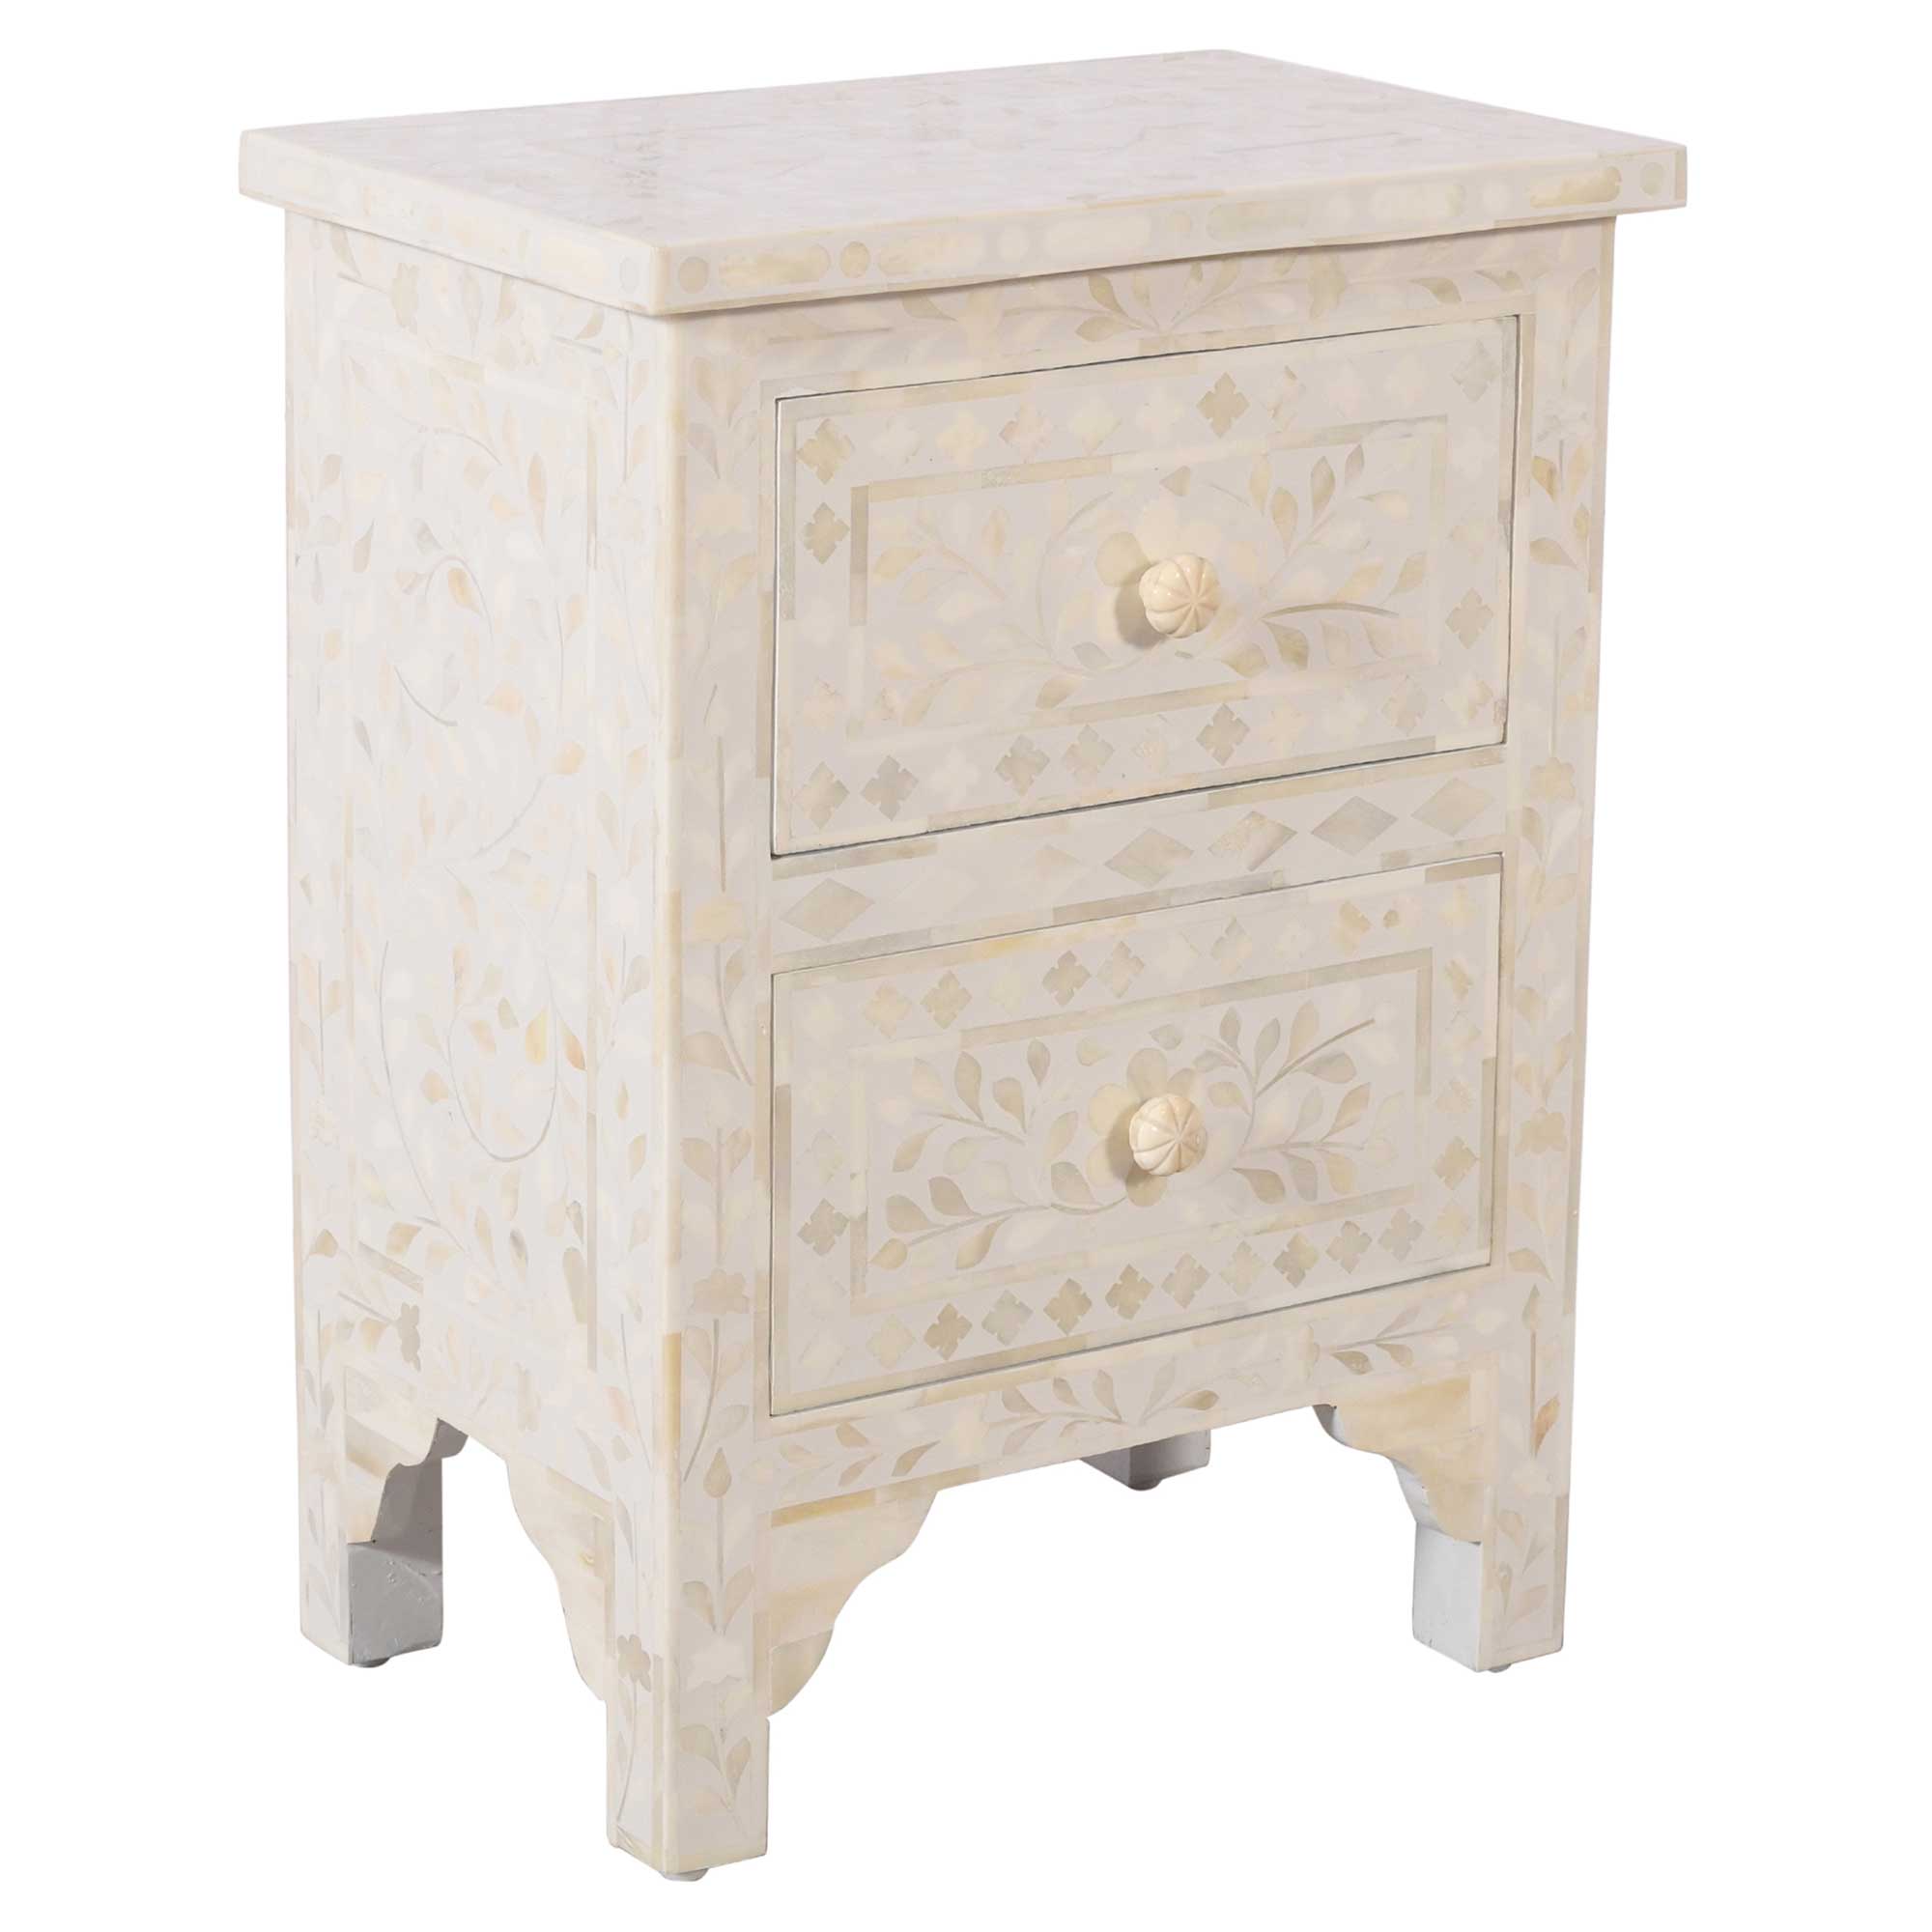 Minnie Bedside Table, Neutral | Barker & Stonehouse